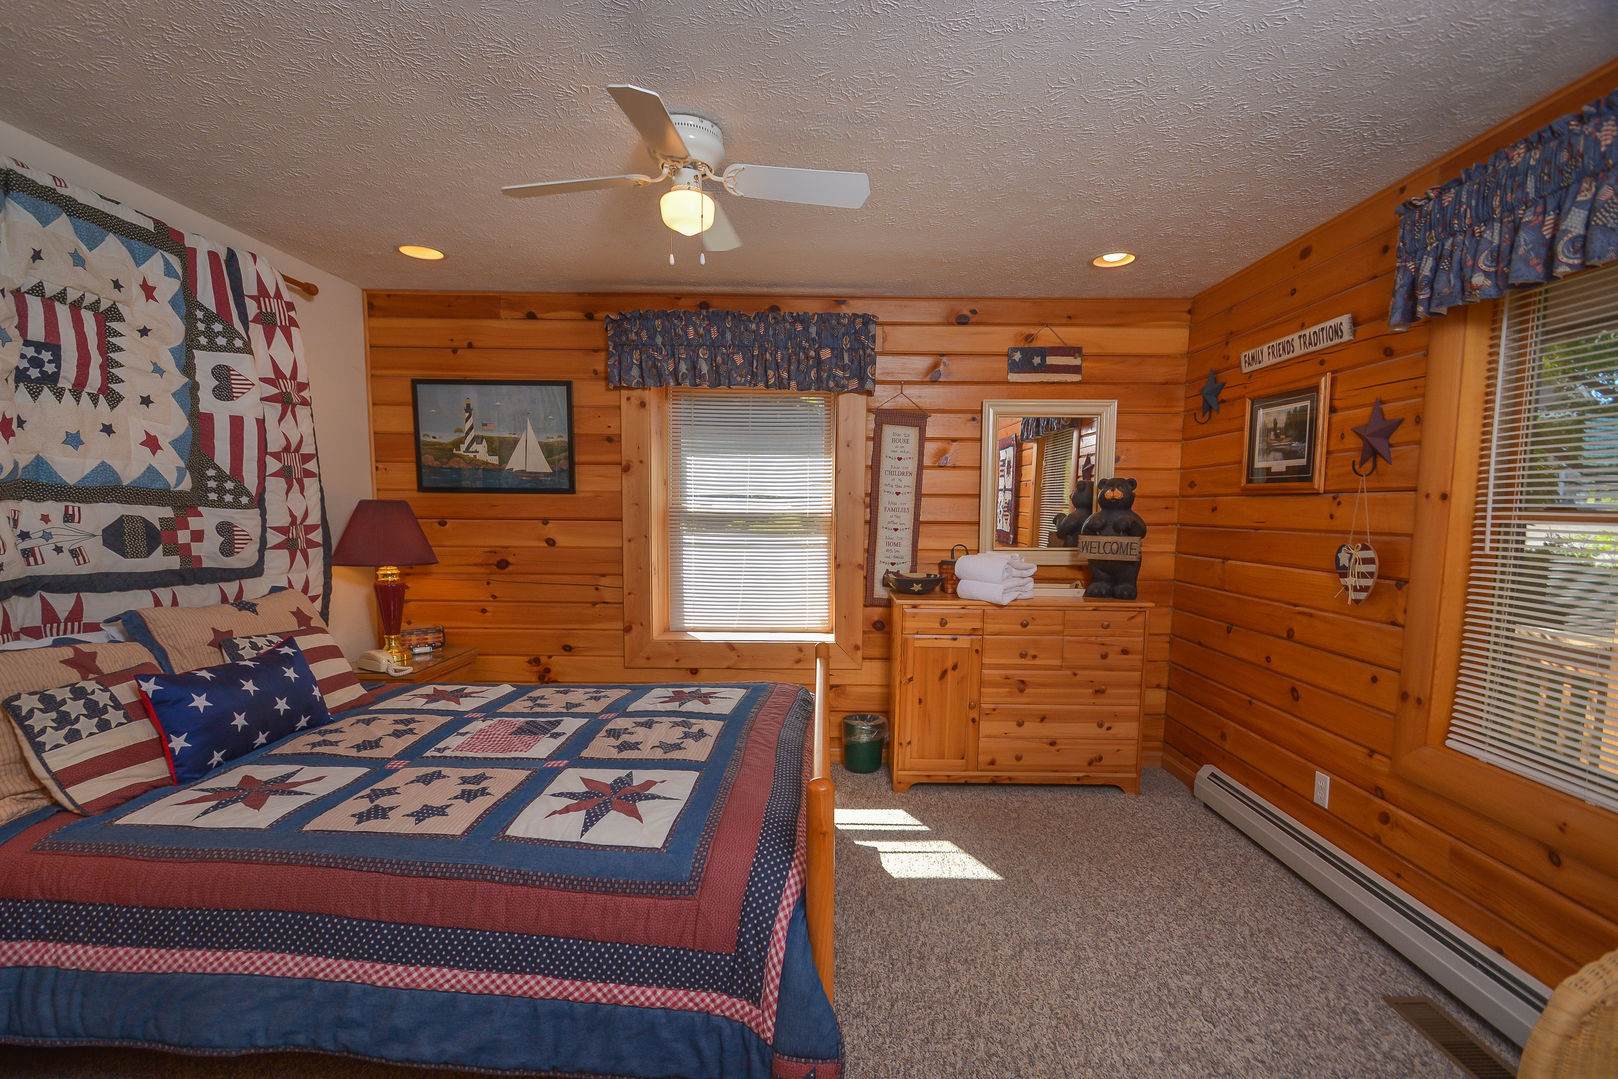 26 Unique Maine Traditions Hardwood Flooring Prices 2024 free download maine traditions hardwood flooring prices of mountain memories taylor made deep creek vacations sales with regard to image 151434669